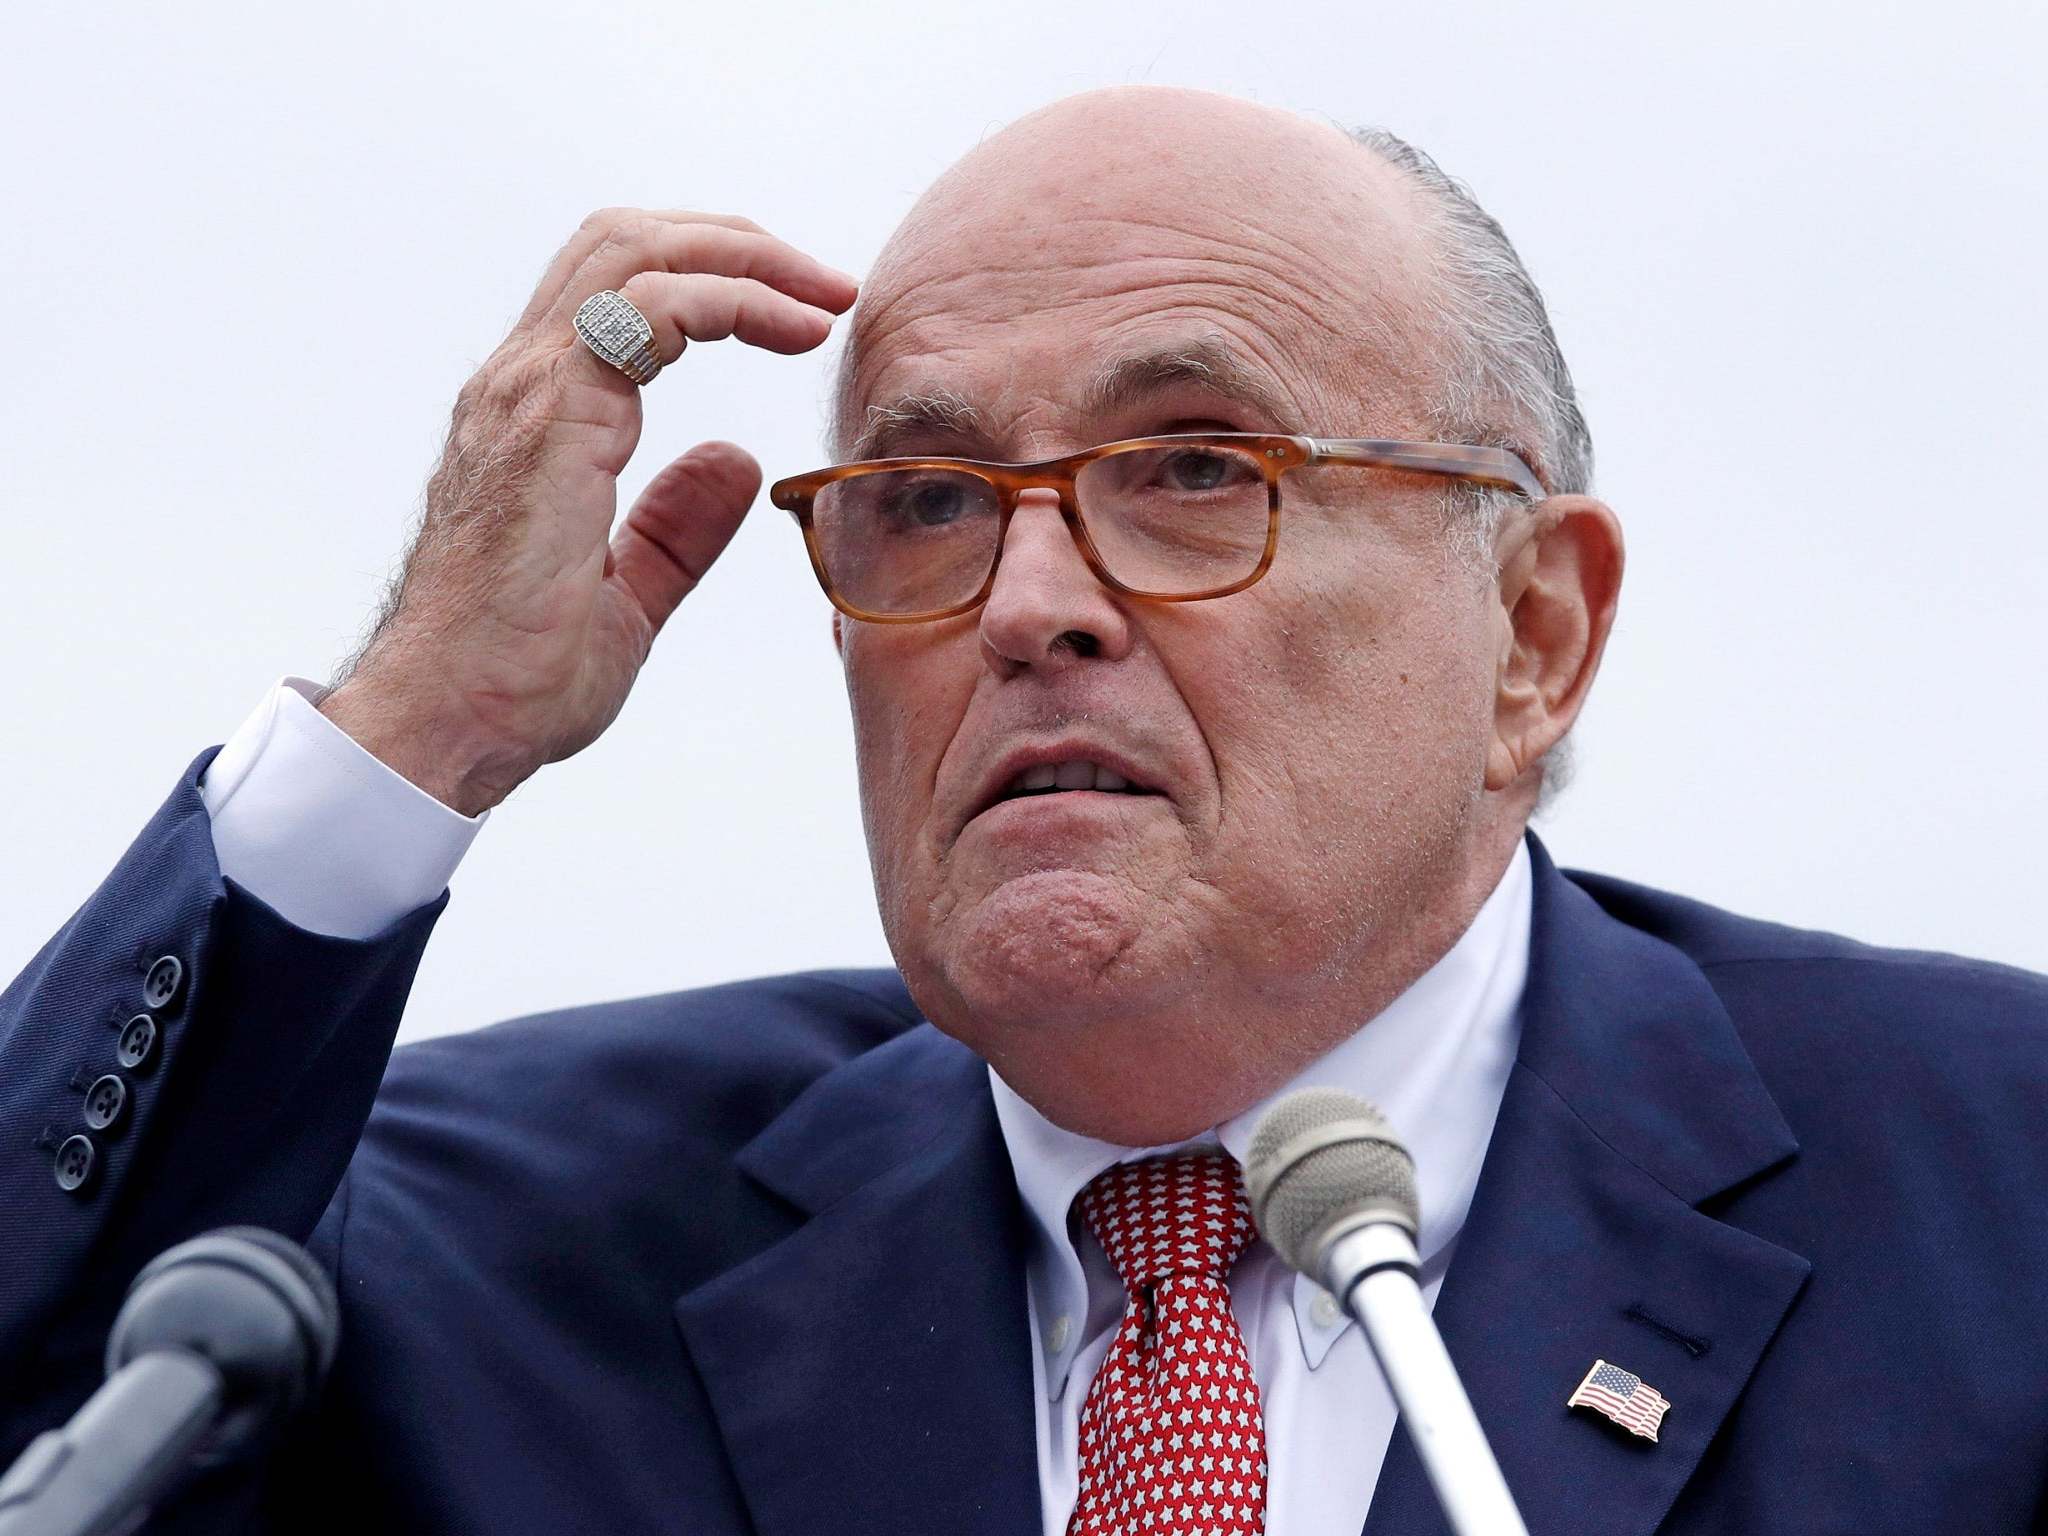 Related video: Rudy Giuliani gives interview on Russian state TV